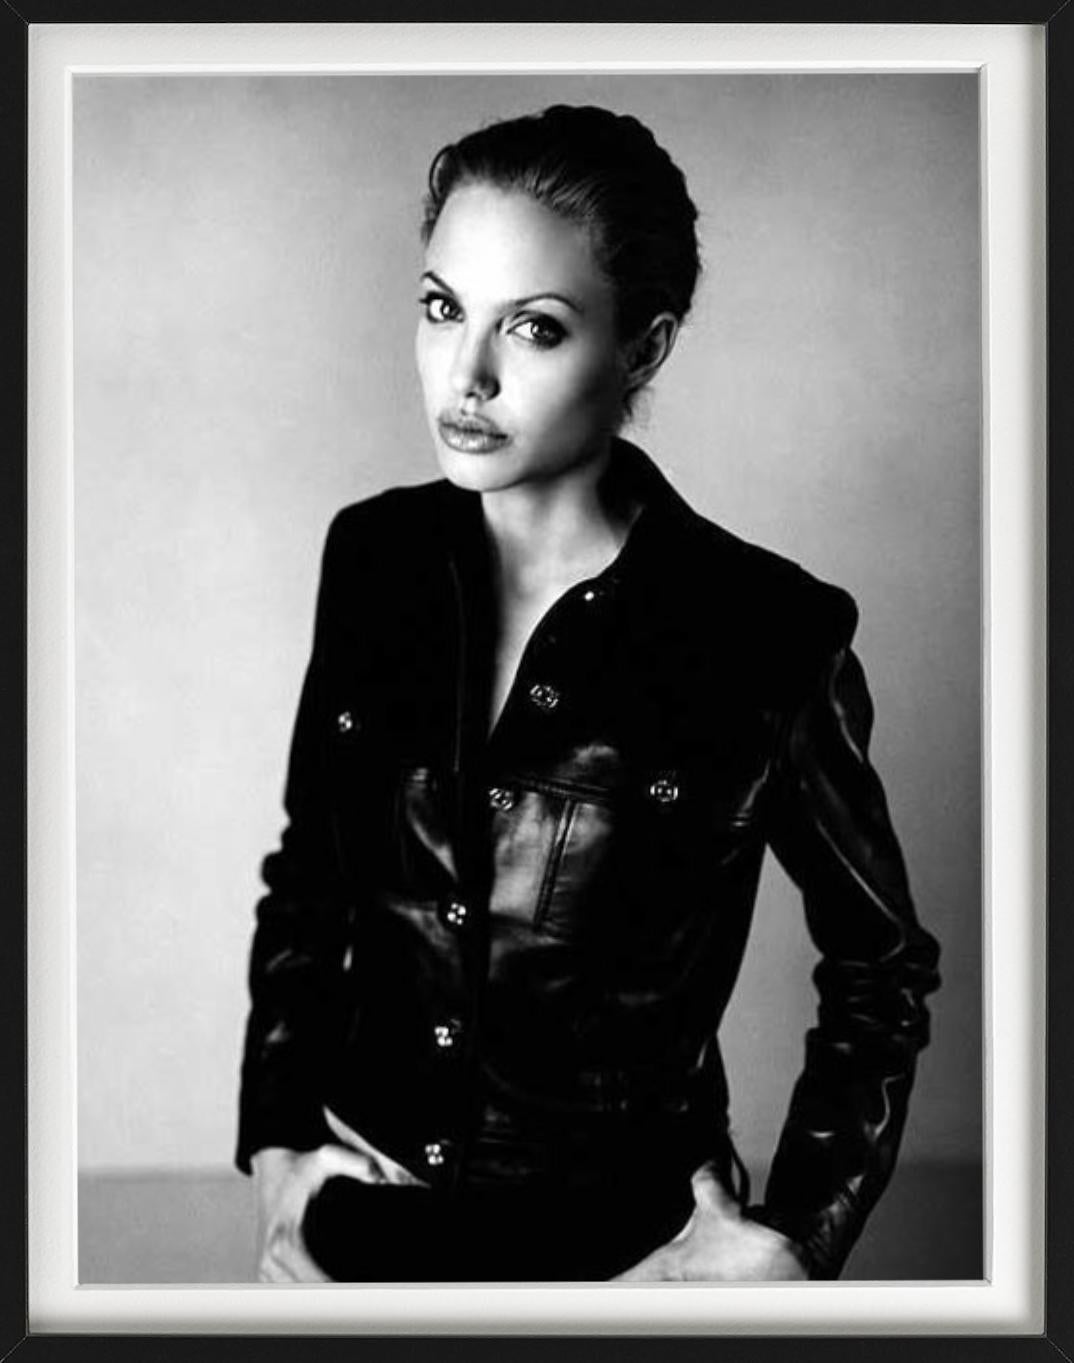 'Angelina Jolie for Esquire' - Angelina in Leather, fine art photography, 1999 - Gray Portrait Photograph by Sante D´ Orazio